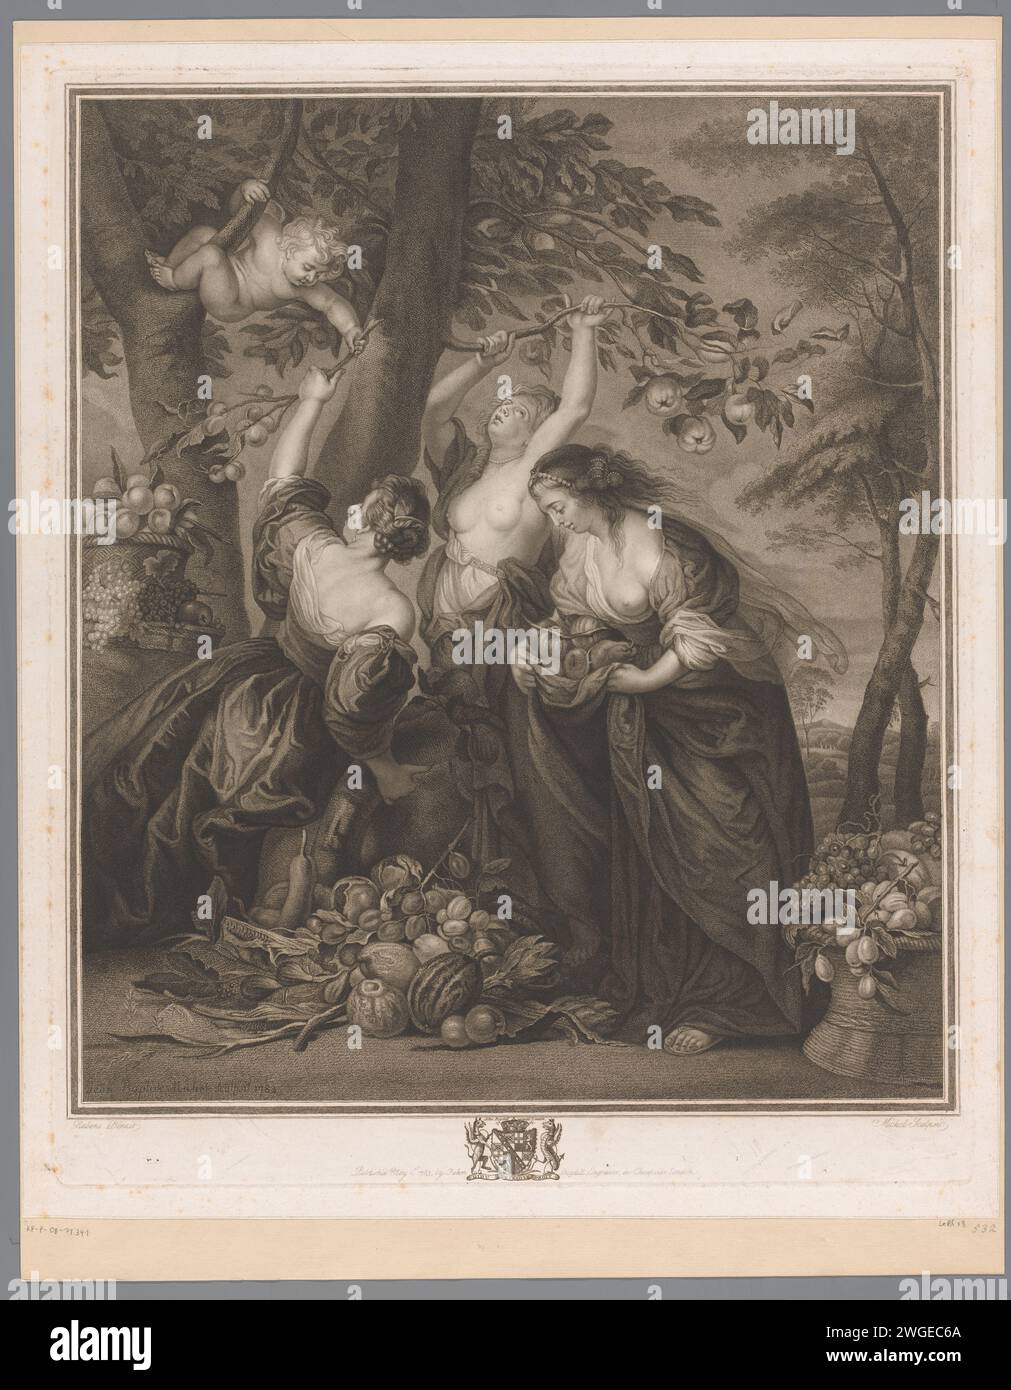 Three Gratives at an Appelboom, Jean Baptiste Michel, After Peter Paul Rubens, 1783 print  London paper engraving / etching Graces (Charites), generally three in number; 'Gratie' (Ripa). trees: apple-tree. armorial bearing, heraldry Stock Photo